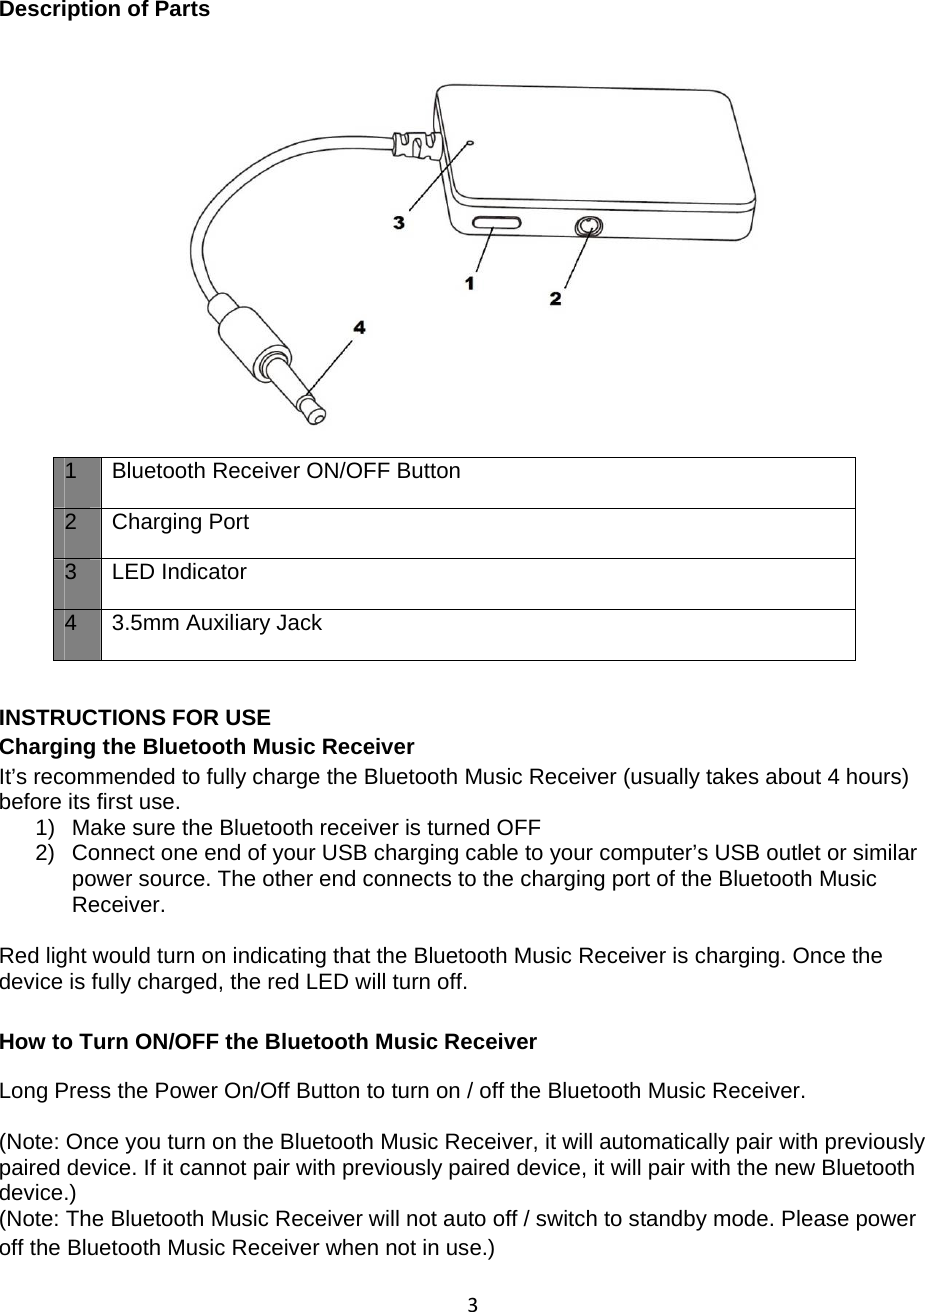 3 Description of Parts          INSTRUCTIONS FOR USE Charging the Bluetooth Music Receiver  It’s recommended to fully charge the Bluetooth Music Receiver (usually takes about 4 hours) before its first use. 1)  Make sure the Bluetooth receiver is turned OFF 2)  Connect one end of your USB charging cable to your computer’s USB outlet or similar power source. The other end connects to the charging port of the Bluetooth Music Receiver.  Red light would turn on indicating that the Bluetooth Music Receiver is charging. Once the device is fully charged, the red LED will turn off. How to Turn ON/OFF the Bluetooth Music Receiver  Long Press the Power On/Off Button to turn on / off the Bluetooth Music Receiver.  (Note: Once you turn on the Bluetooth Music Receiver, it will automatically pair with previously paired device. If it cannot pair with previously paired device, it will pair with the new Bluetooth device.) (Note: The Bluetooth Music Receiver will not auto off / switch to standby mode. Please power off the Bluetooth Music Receiver when not in use.) 1 Bluetooth Receiver ON/OFF Button 2 Charging Port 3 LED Indicator 4  3.5mm Auxiliary Jack  